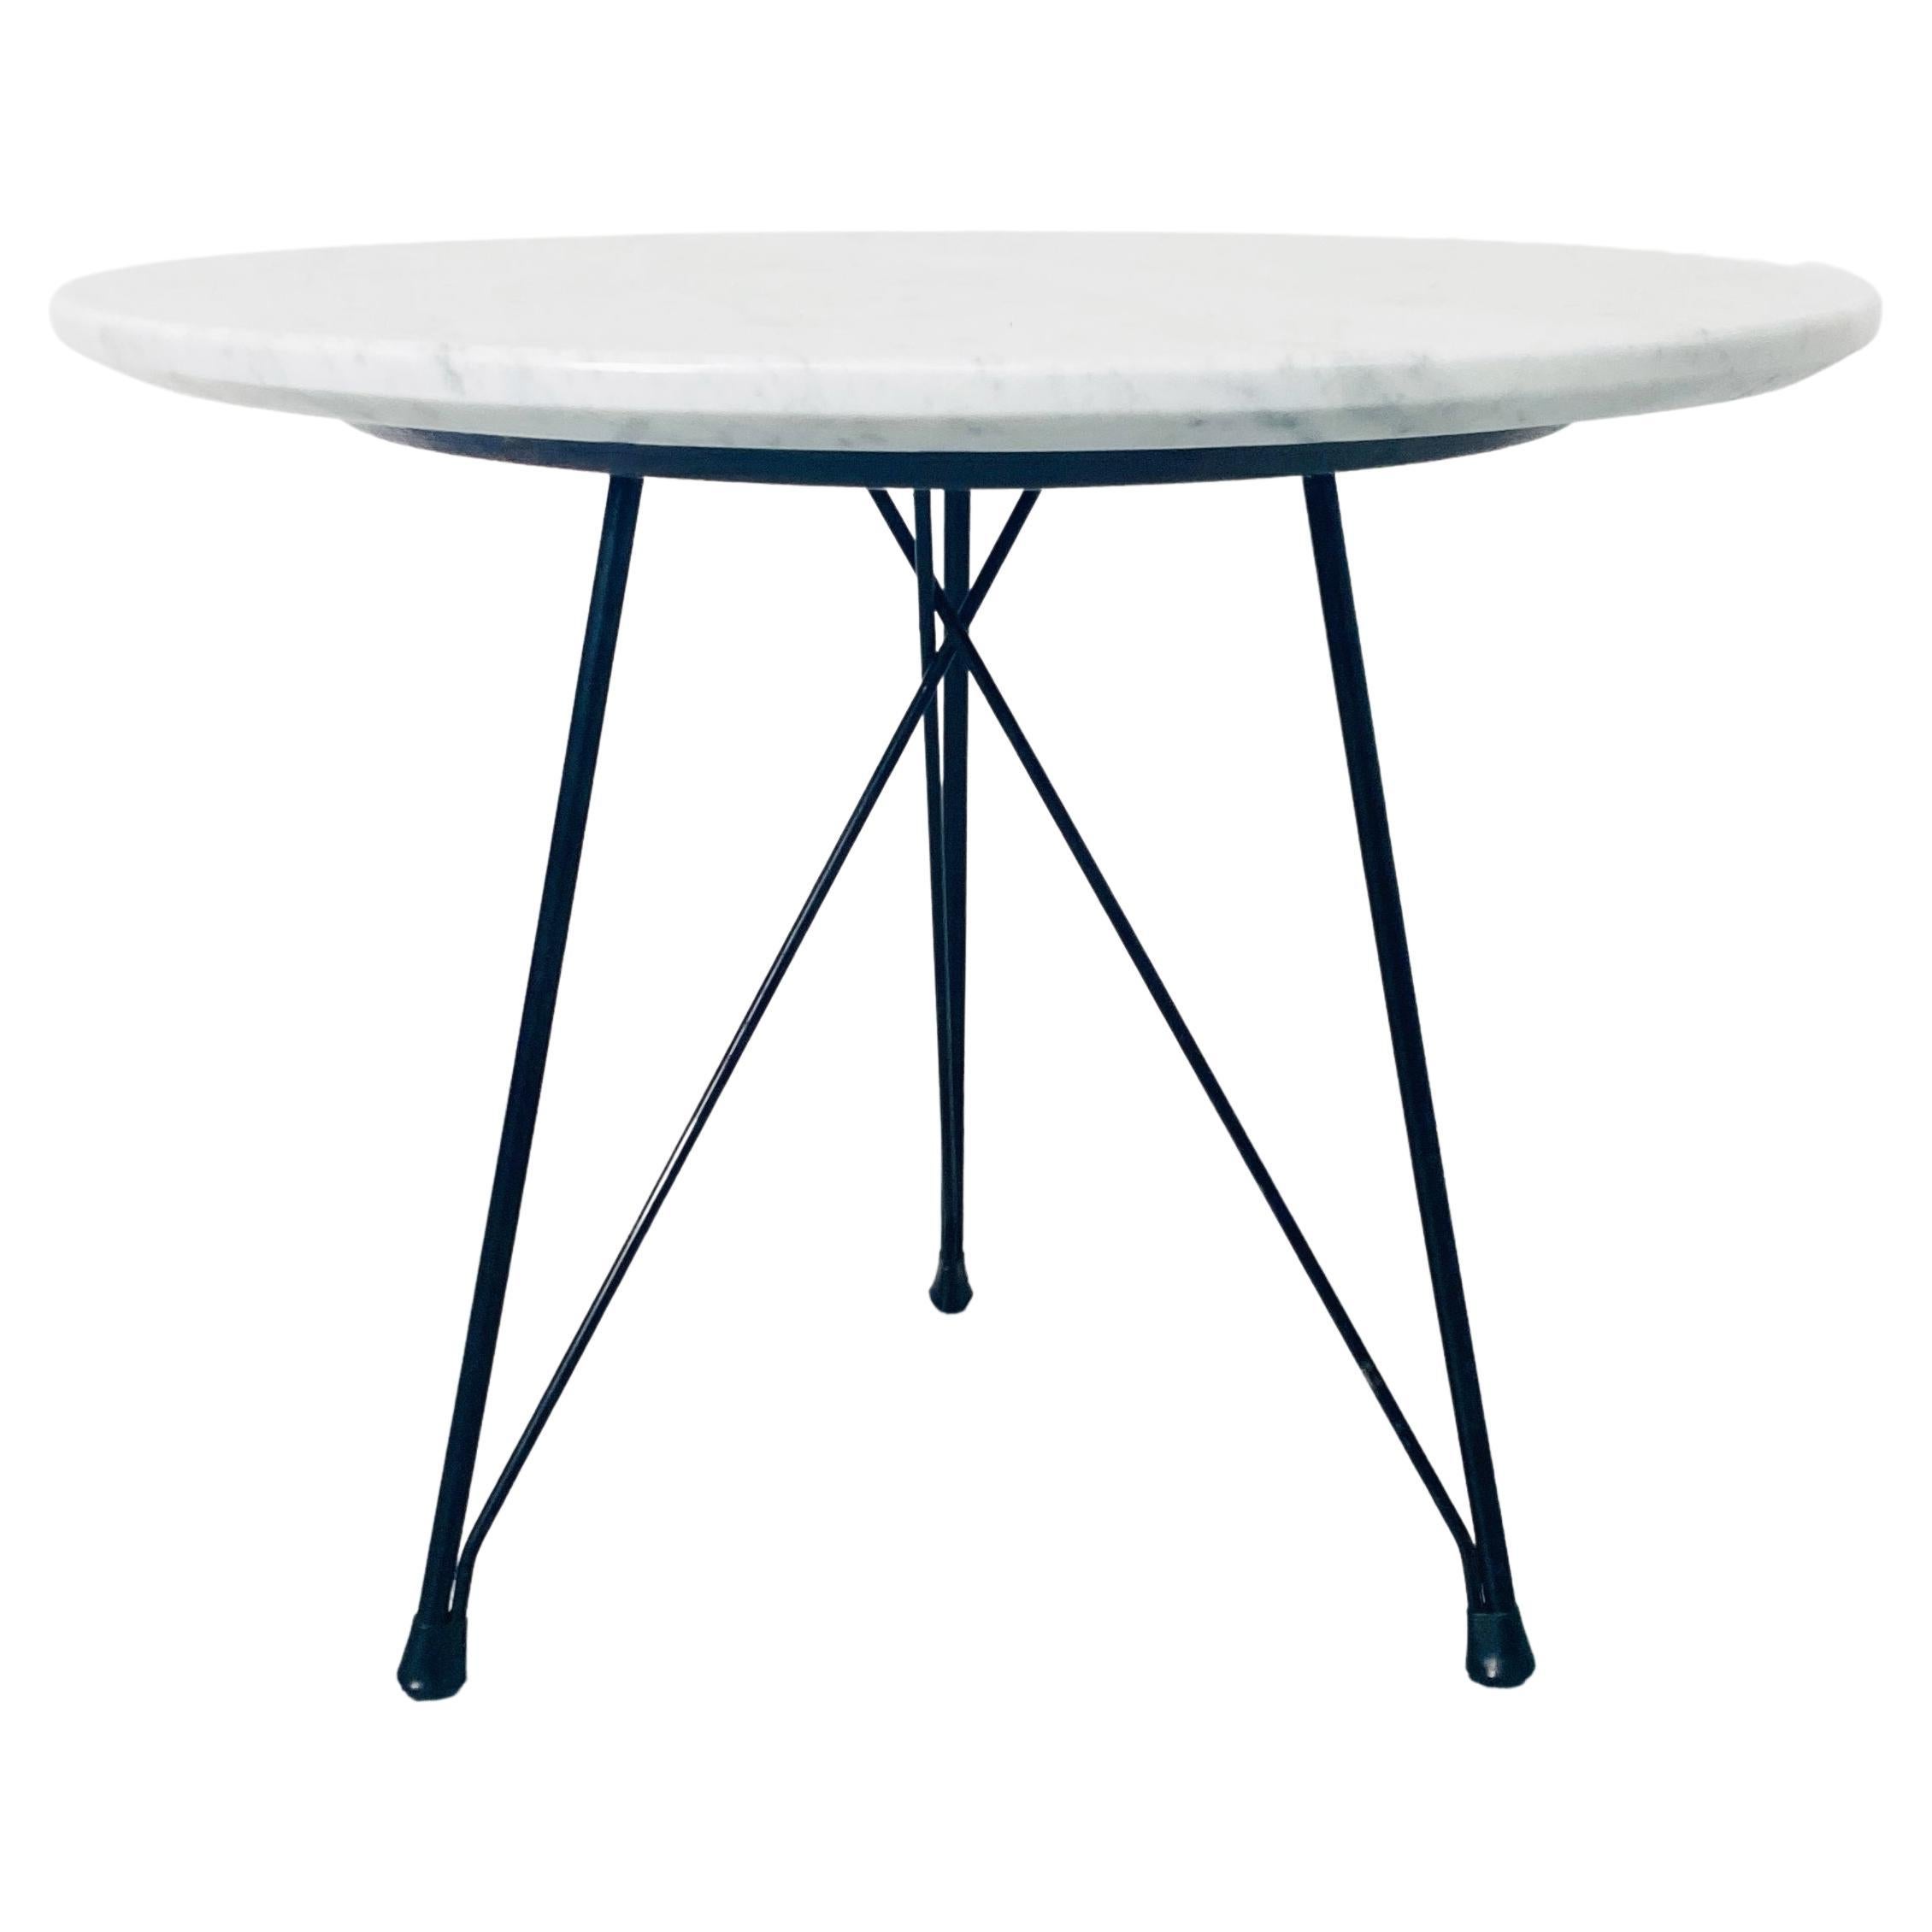 Italian Round Coffee Table in Marble and Black Enamelled Metal, 1960s For Sale